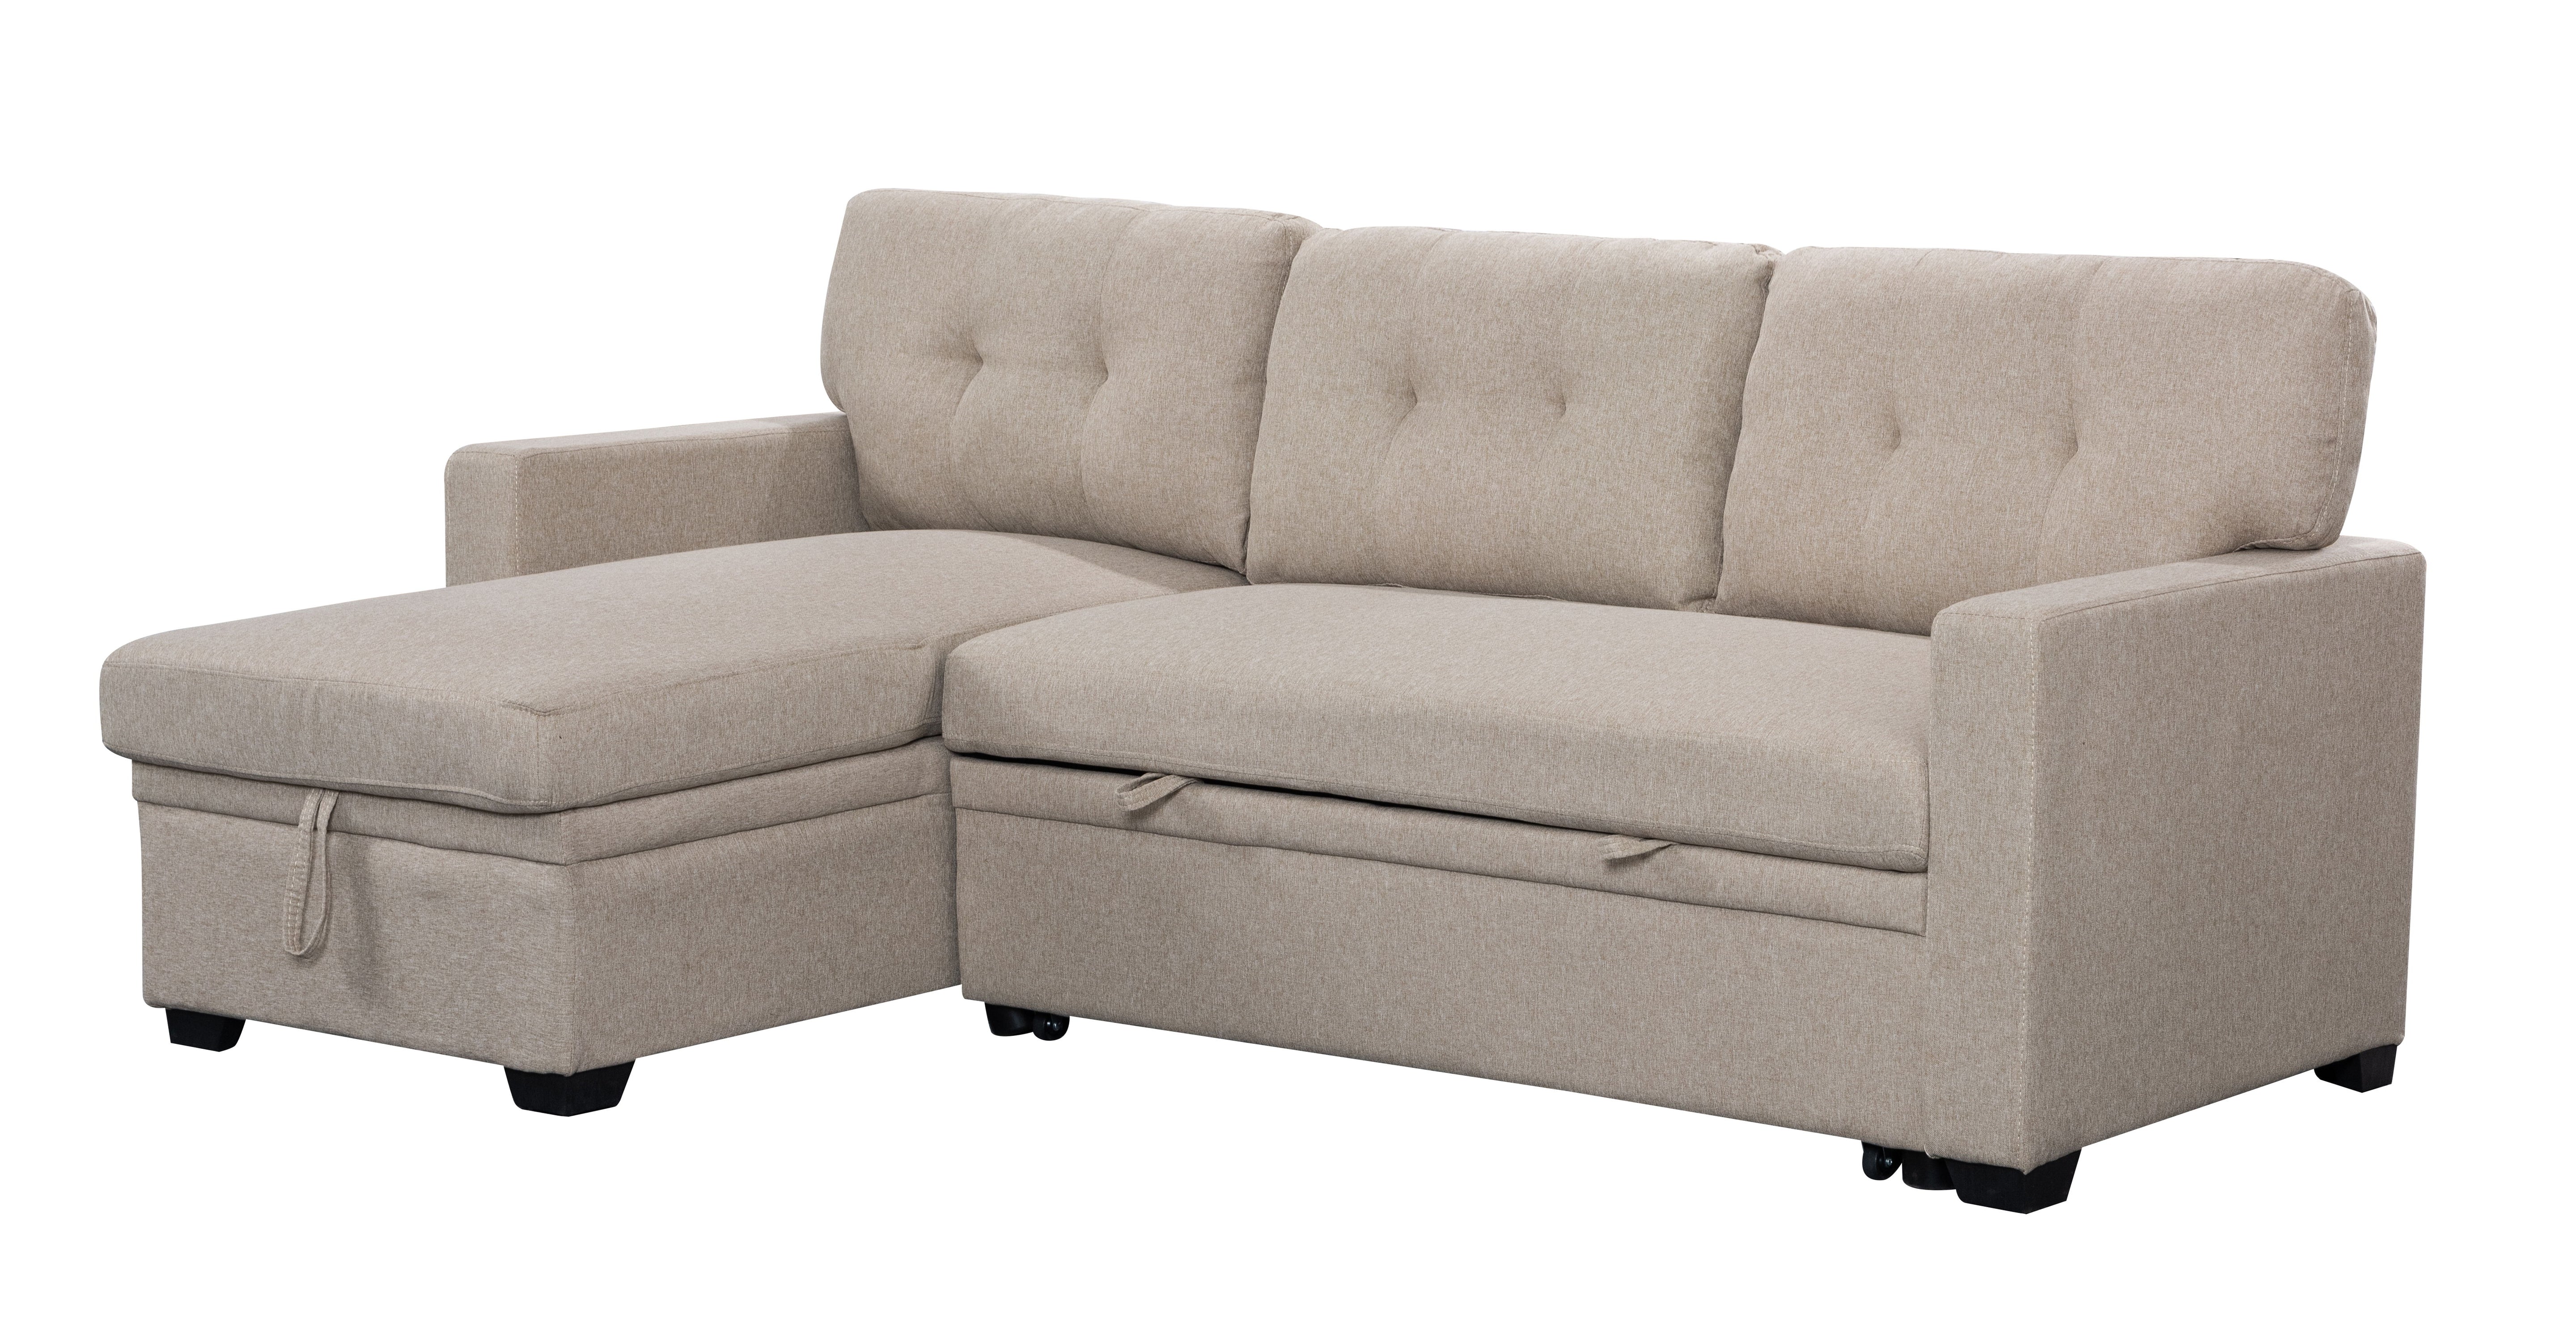 Miller - Linen Reversible Sleeper Sectional Sofa With Storage Chaise